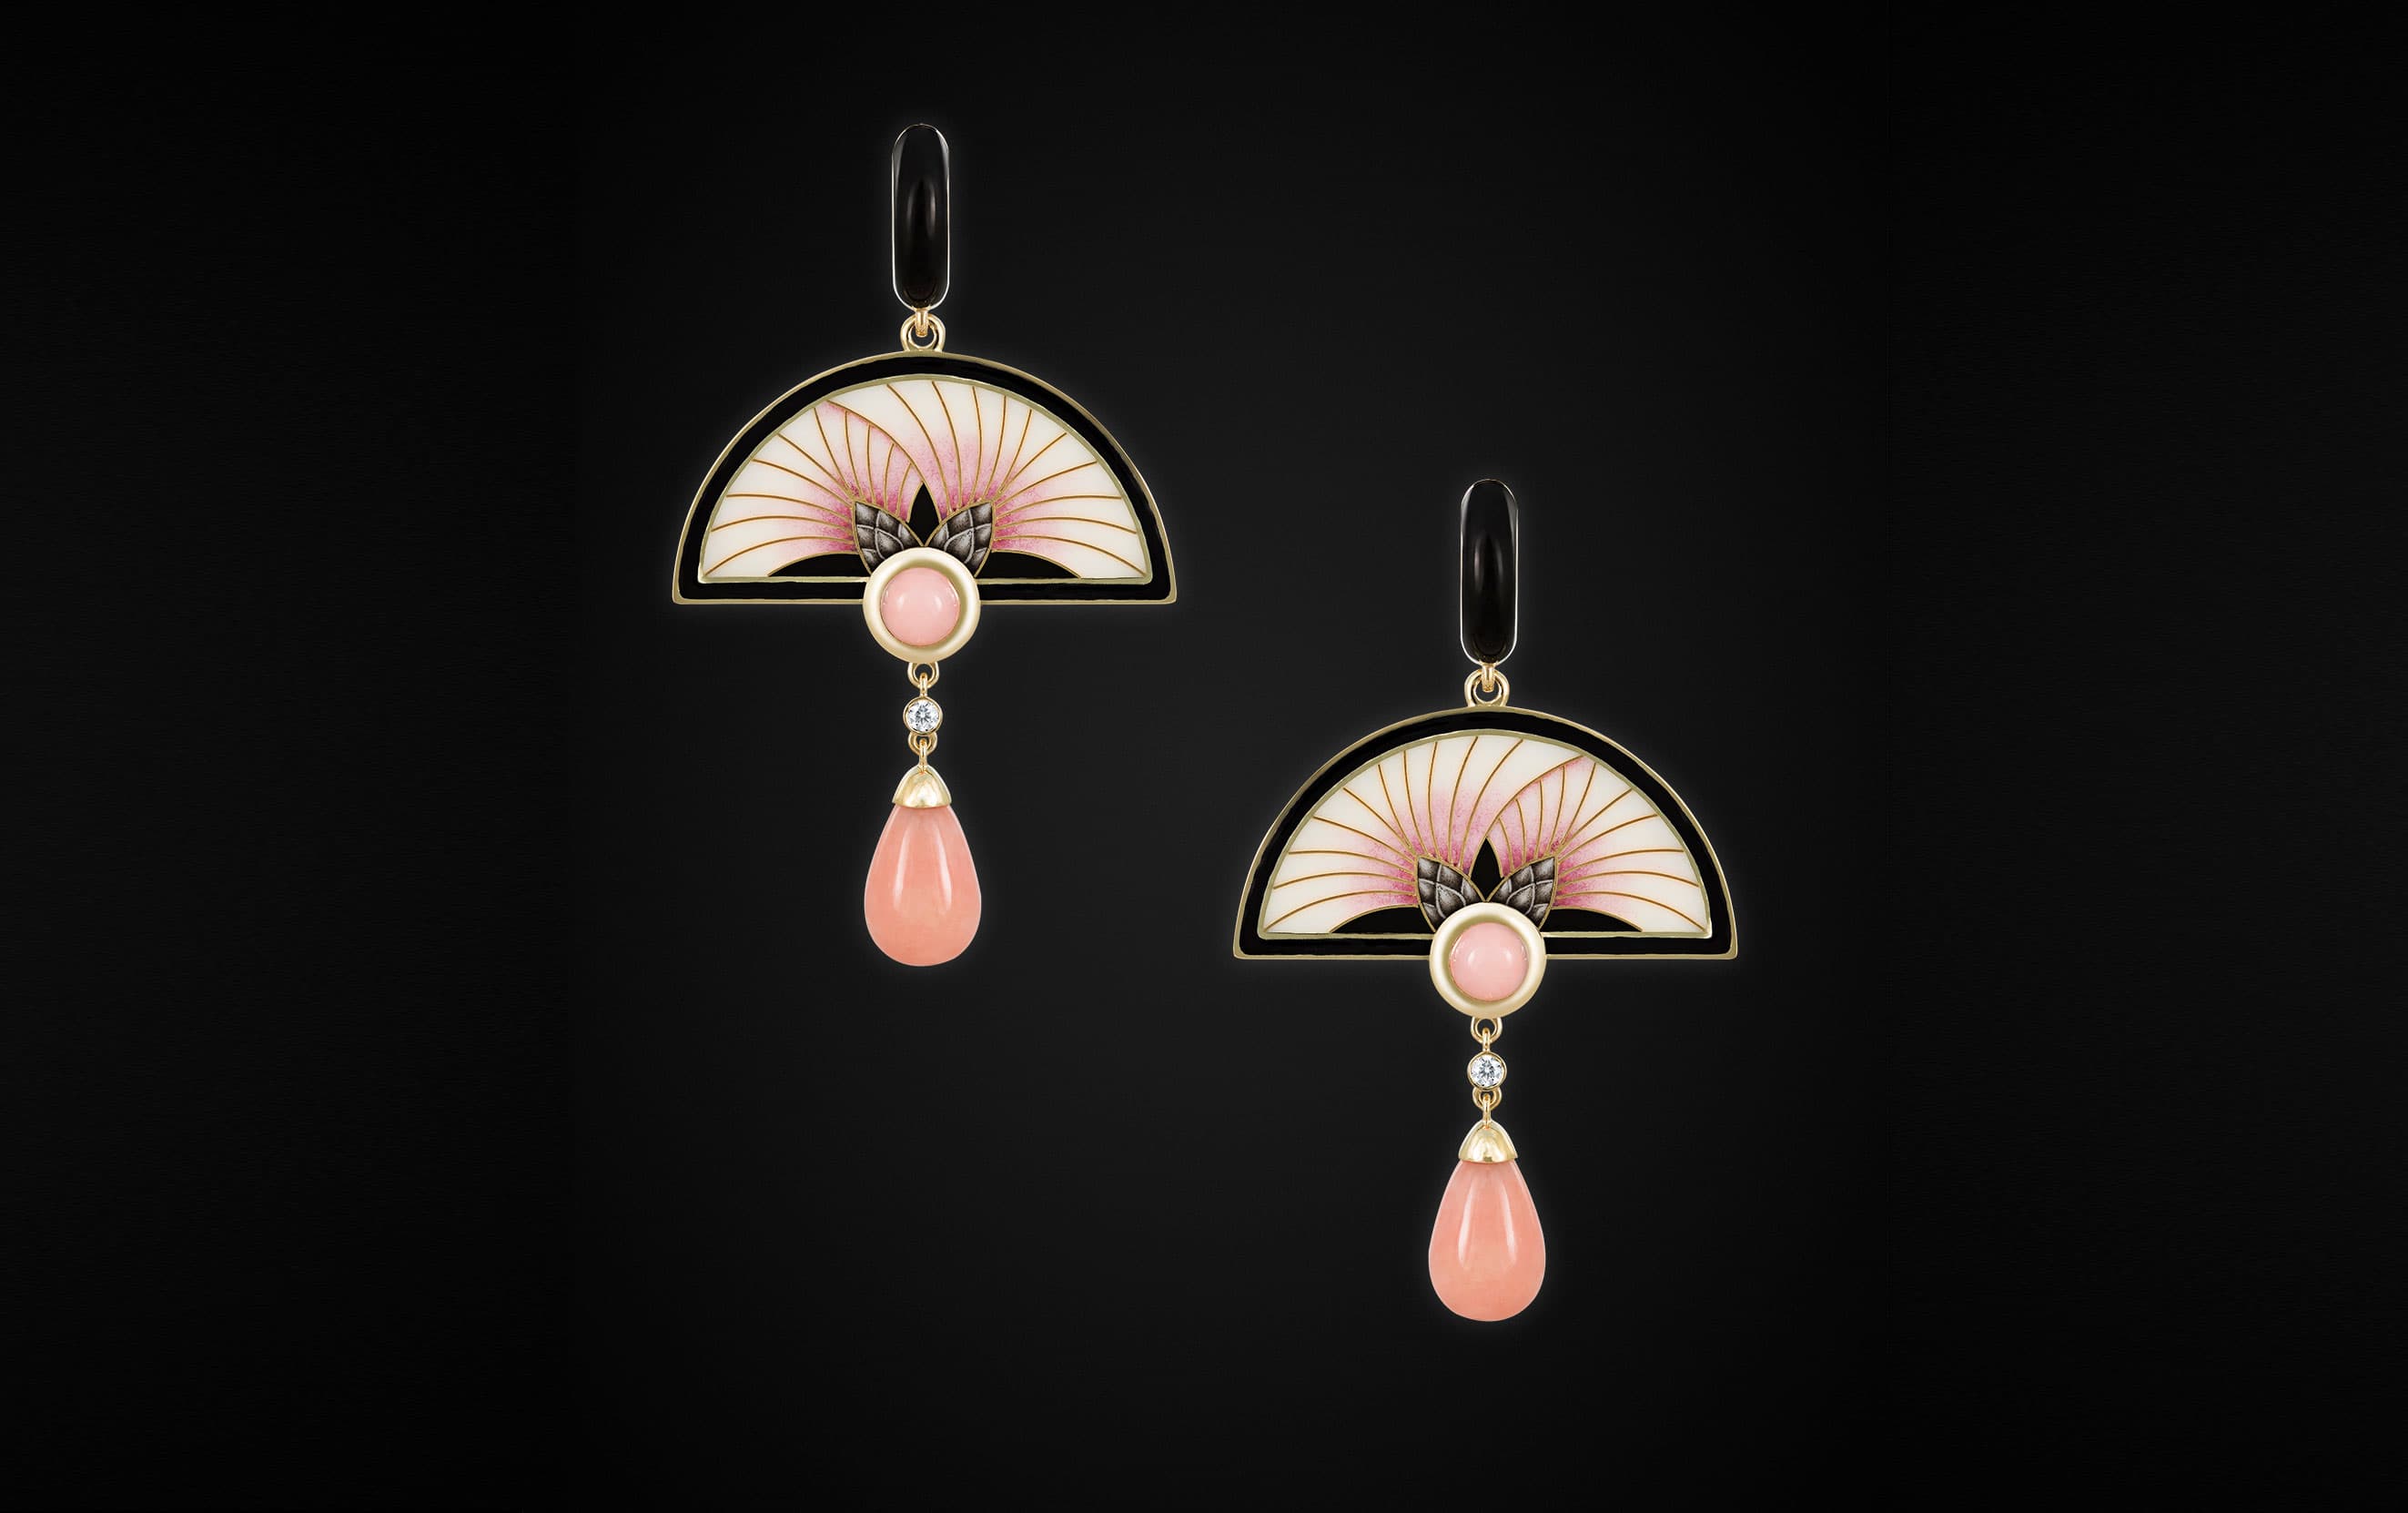 'Burdock' earrings by Ilgiz F. in art deco style embellished with hot enamel and pink opals